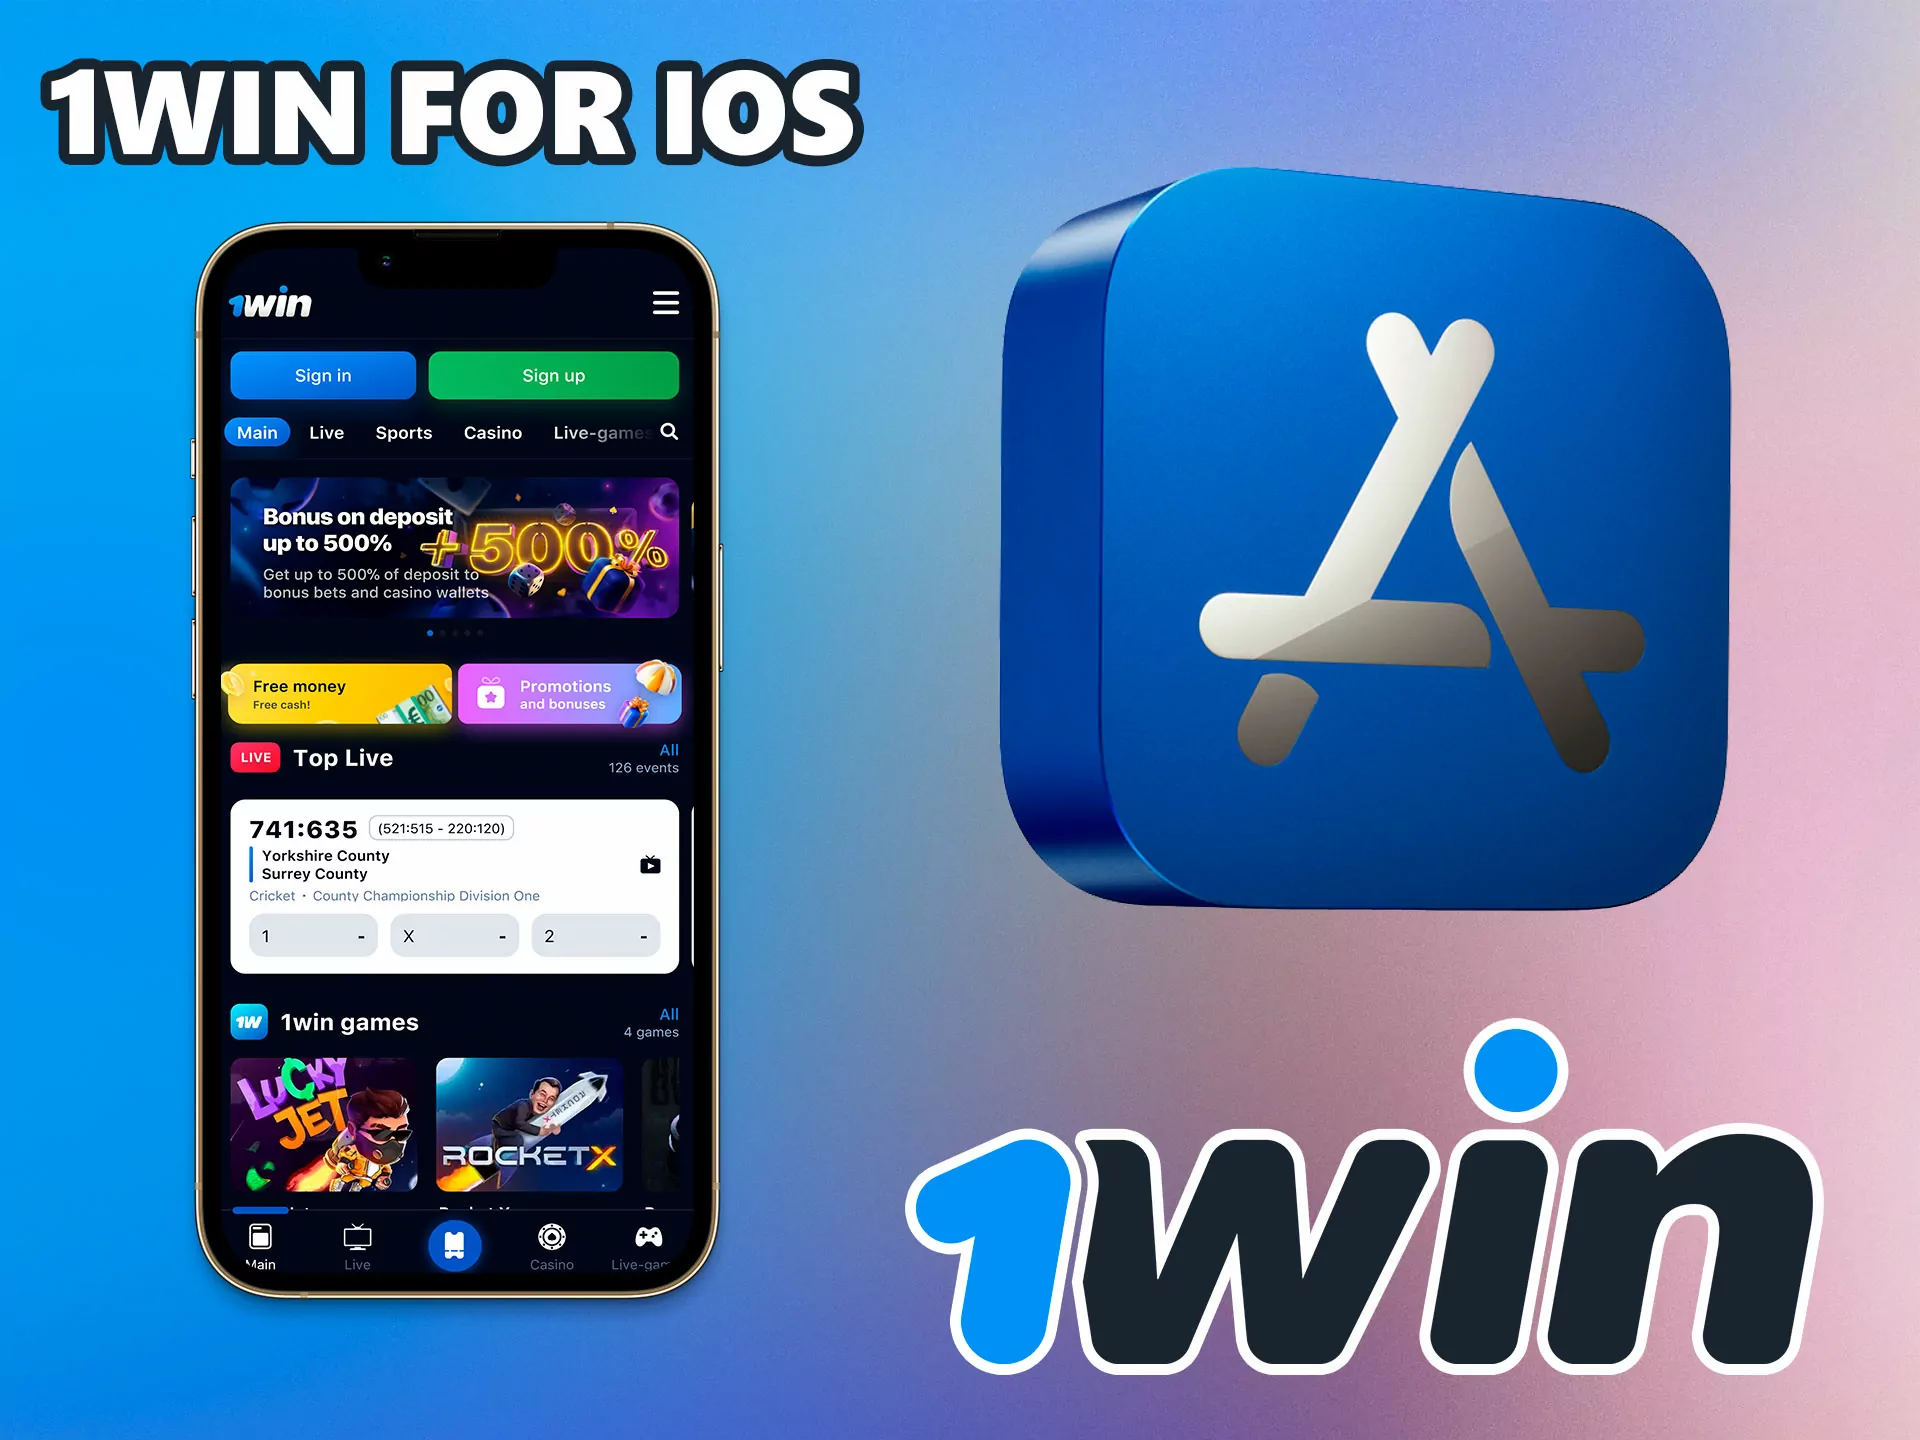 1Win app customers will be given the opportunity to take advantage of a special bonus.